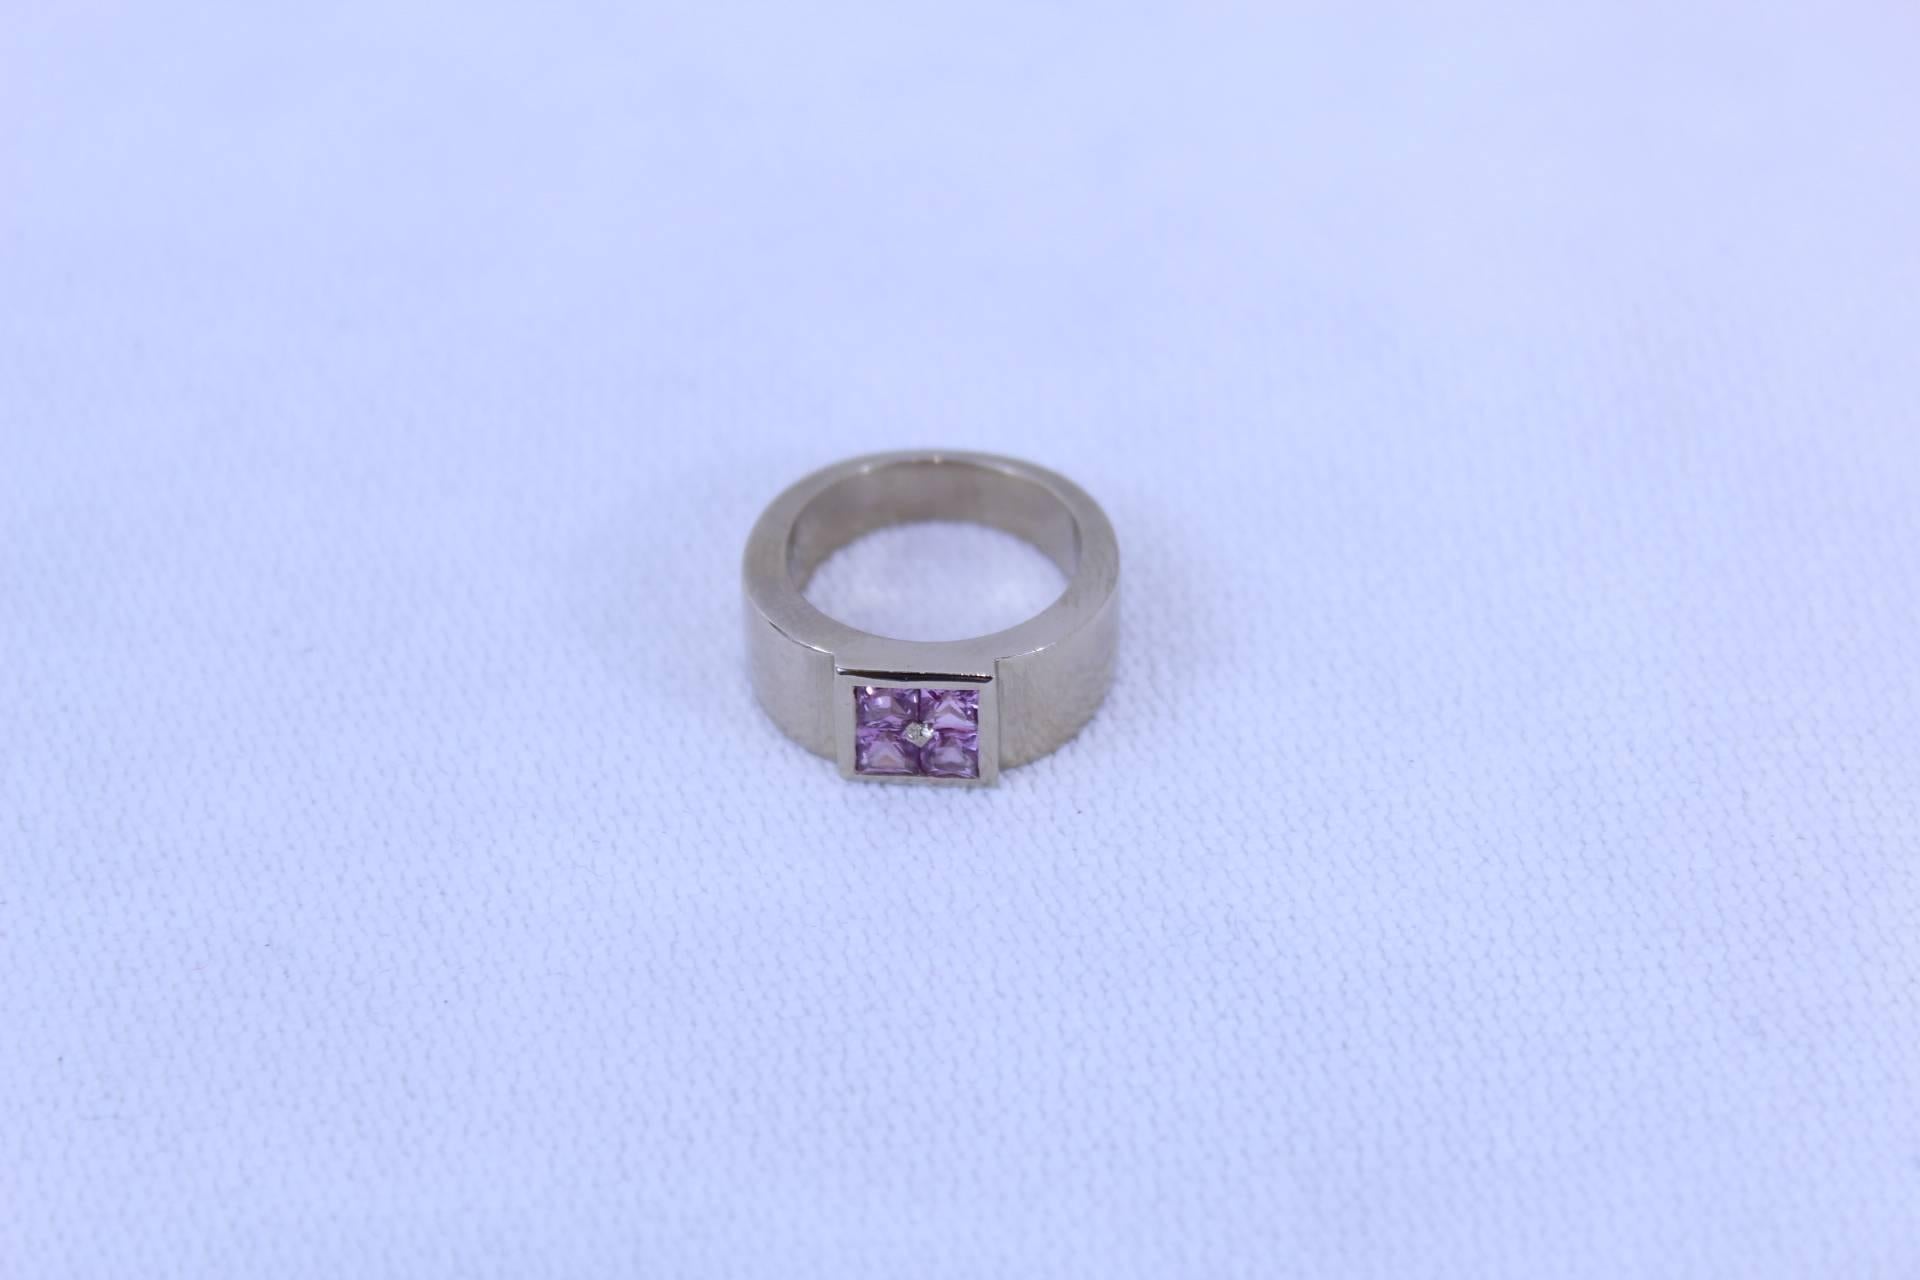 Amazing Hermes ring in yellow gold with 4 pink Shapyrs.

Size 52

Good condition, small signs of wear but not noticeable when wearing it.